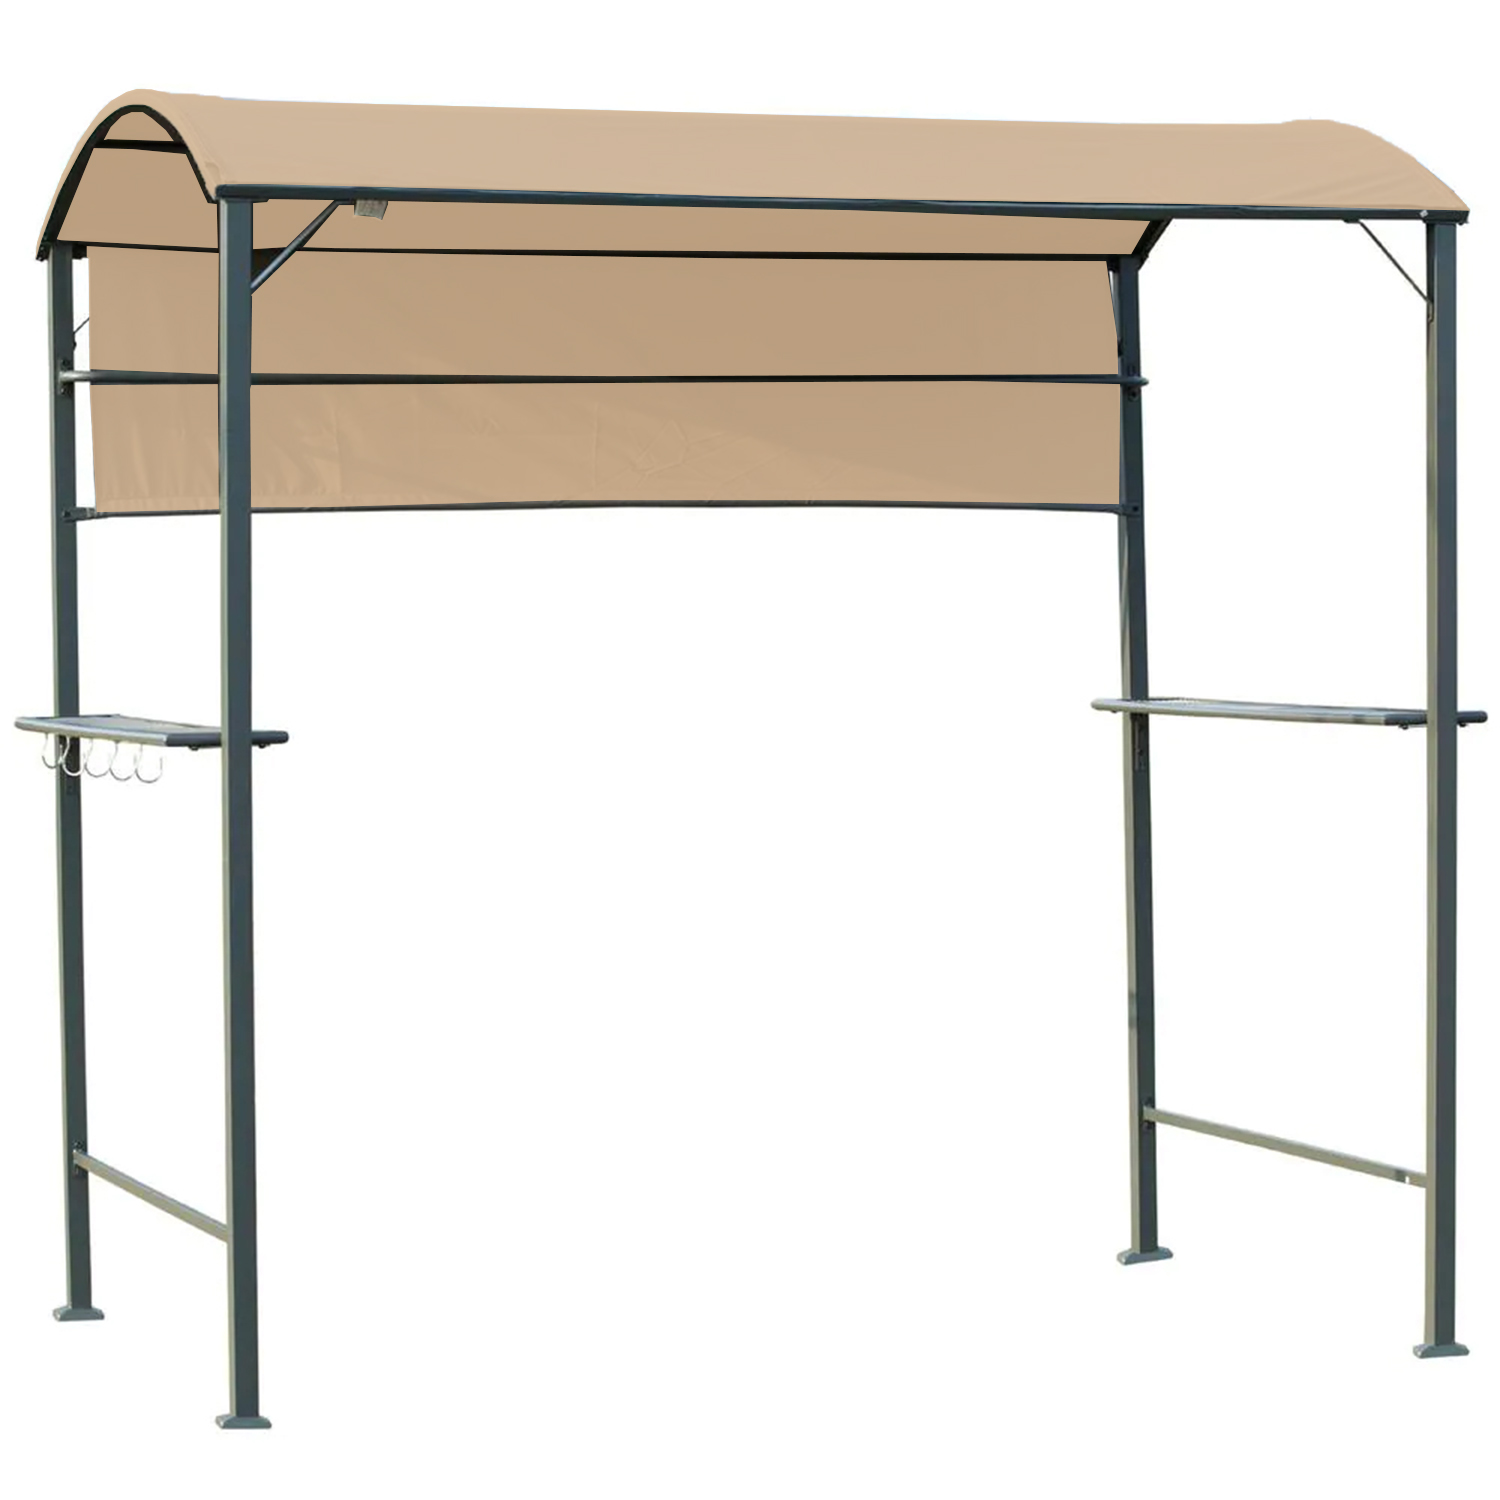 Replacement Canopy for 84C-174 Curved Grill Gazebo- Riplock 350